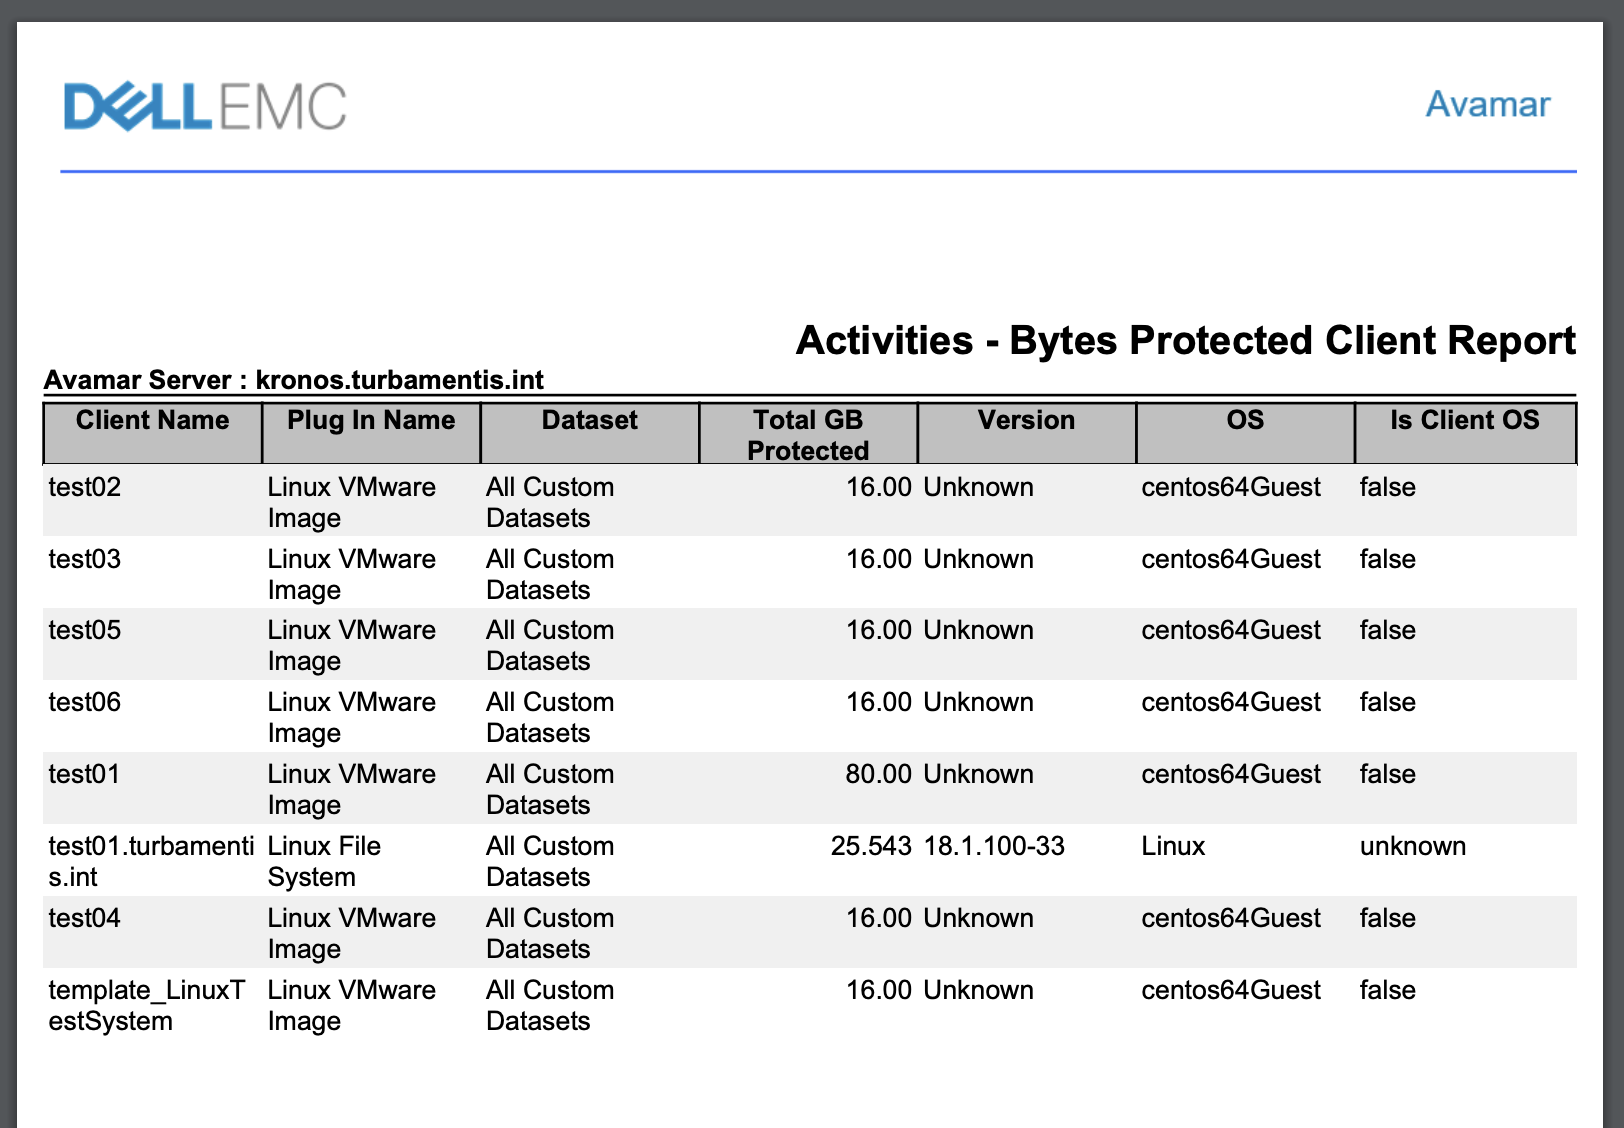 Bytes Protected Per Client Report in PDF